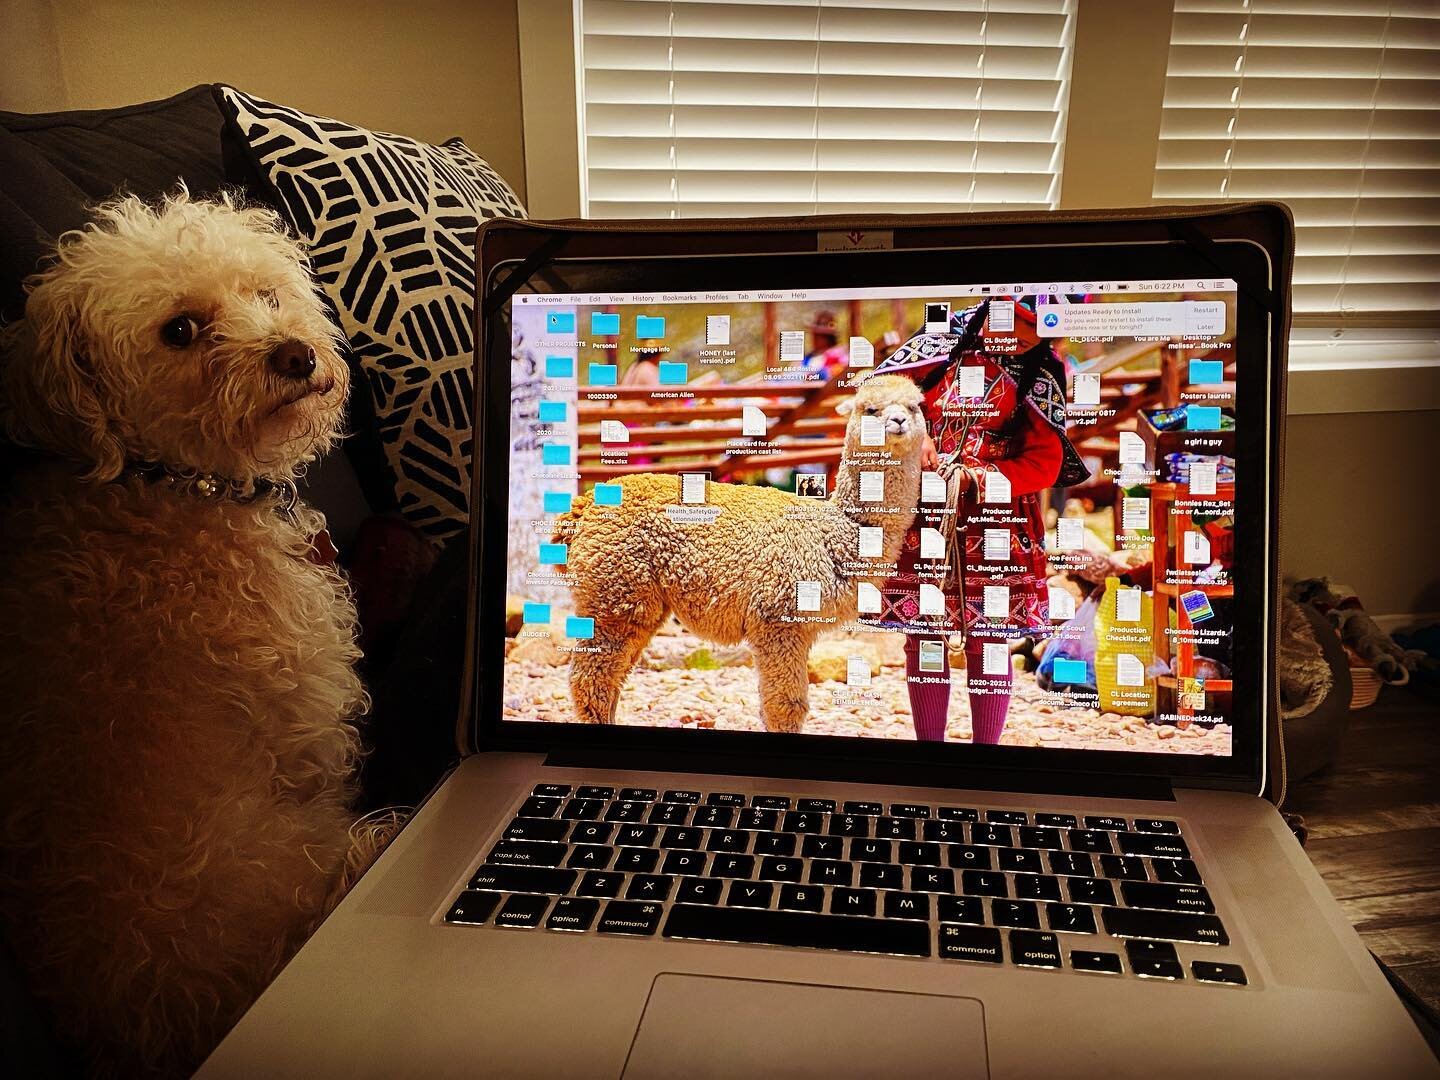 This how work goes these days and I wouldn&rsquo;t have it any other way! 😊🐶 #agirlsbestfriend #marfathedog #movieprep #indiefilm #behindthescenes #doodlesofinstagram #everydayisbringyourdogtoworkday